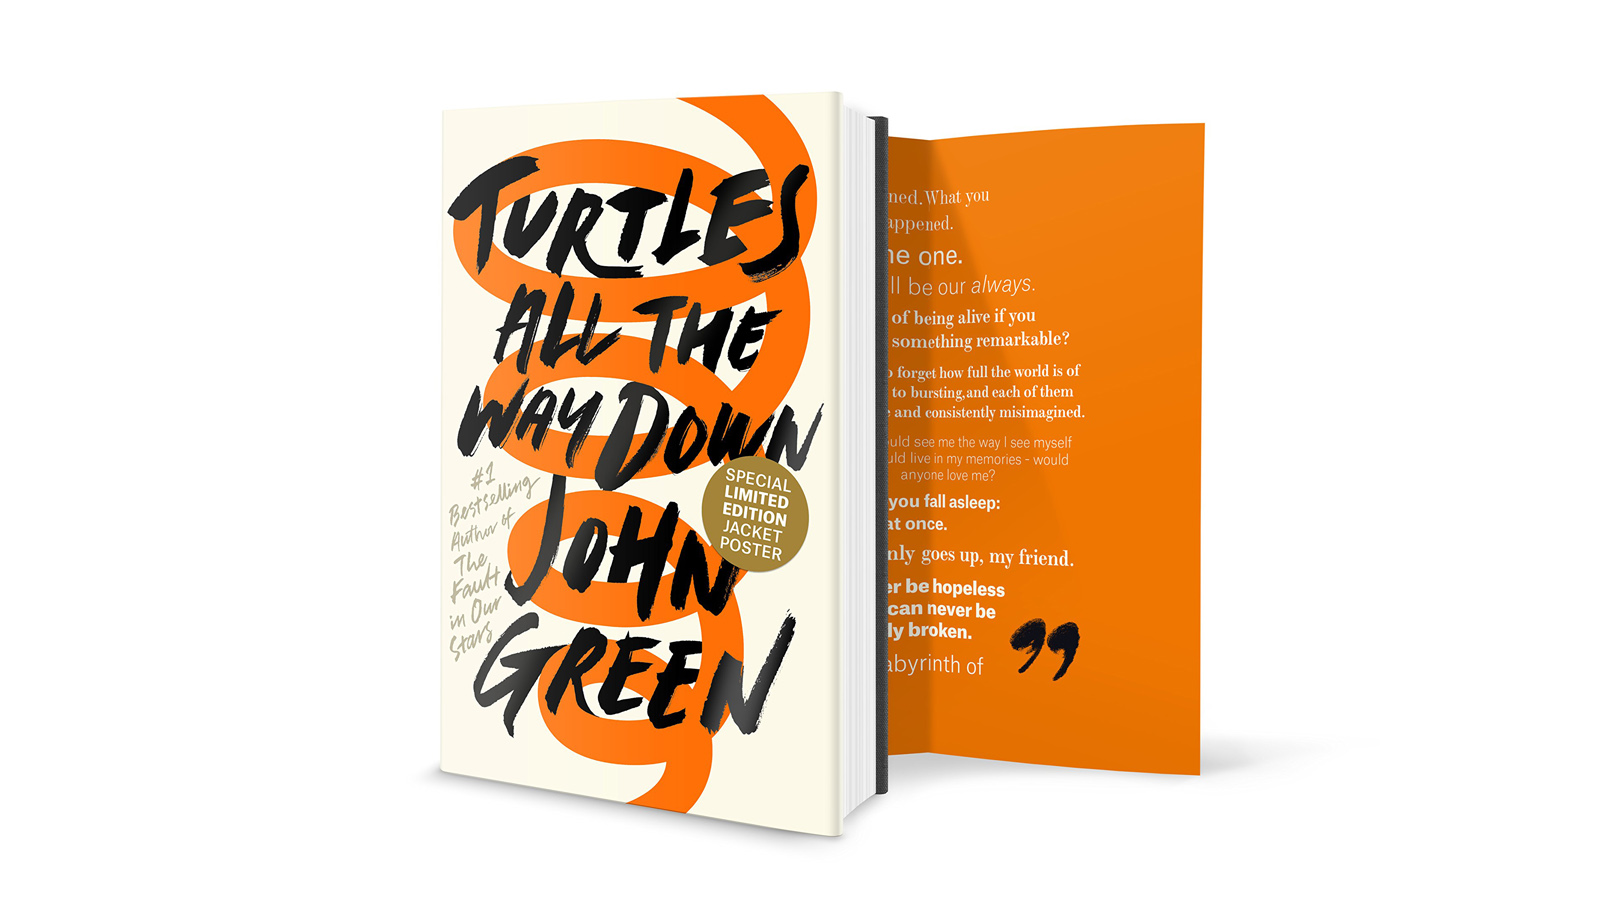 Turtles All The Way Down Book Review